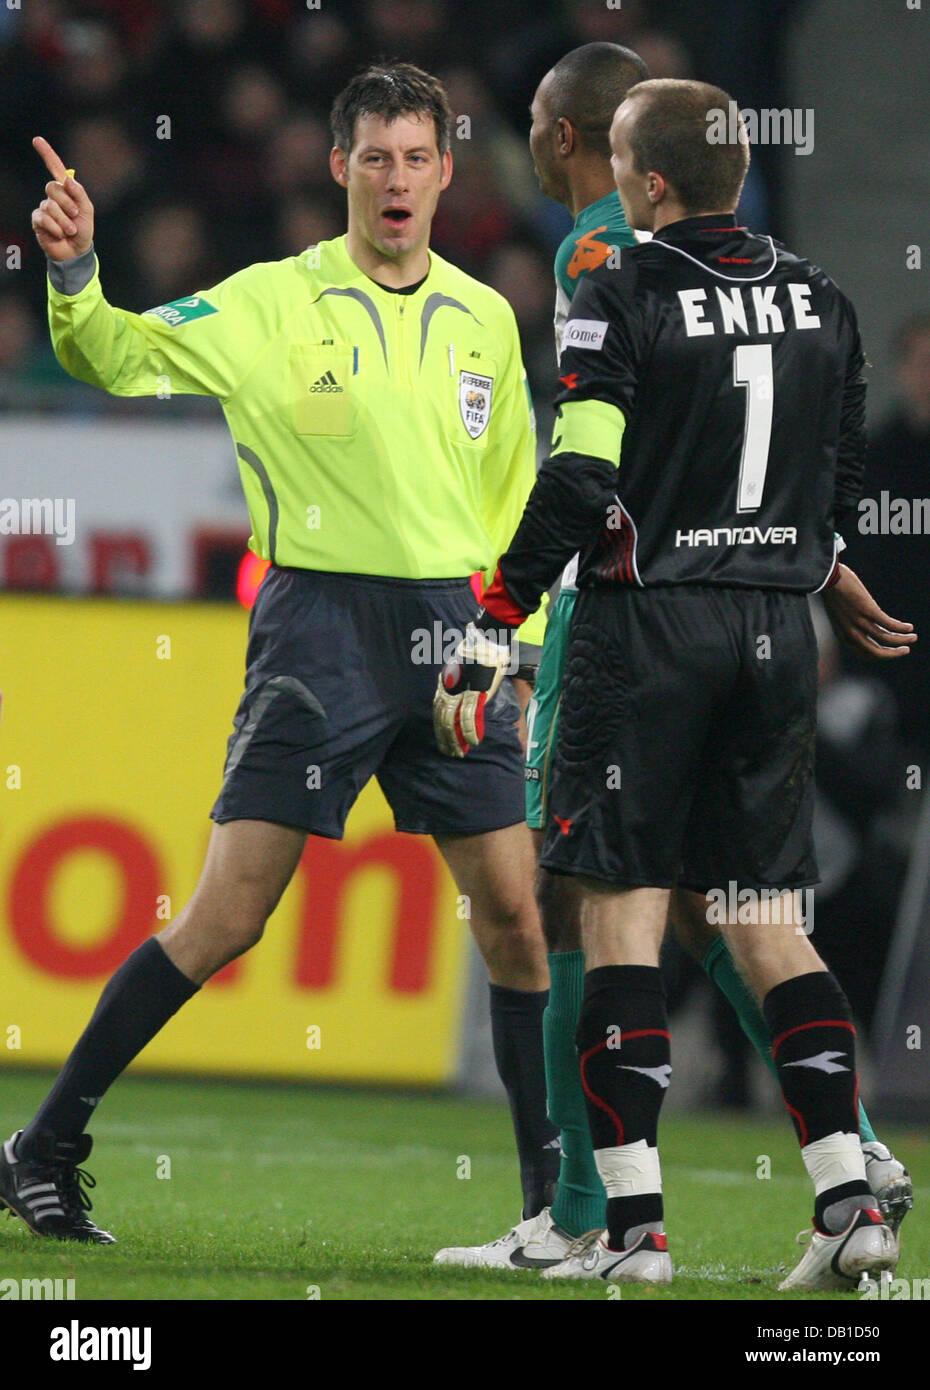 Goalkeeper Robert Enke (R) of Hanover discusses with referee Wolfgang Starck during the Bundesliga match Hanover 96 vs Werder Bremen at AWD-Arena stadium in Hanover, Germany, 08 December 2007. Hanover defeated Bremen 4-3. Photo: Friso Gentsch Stock Photo